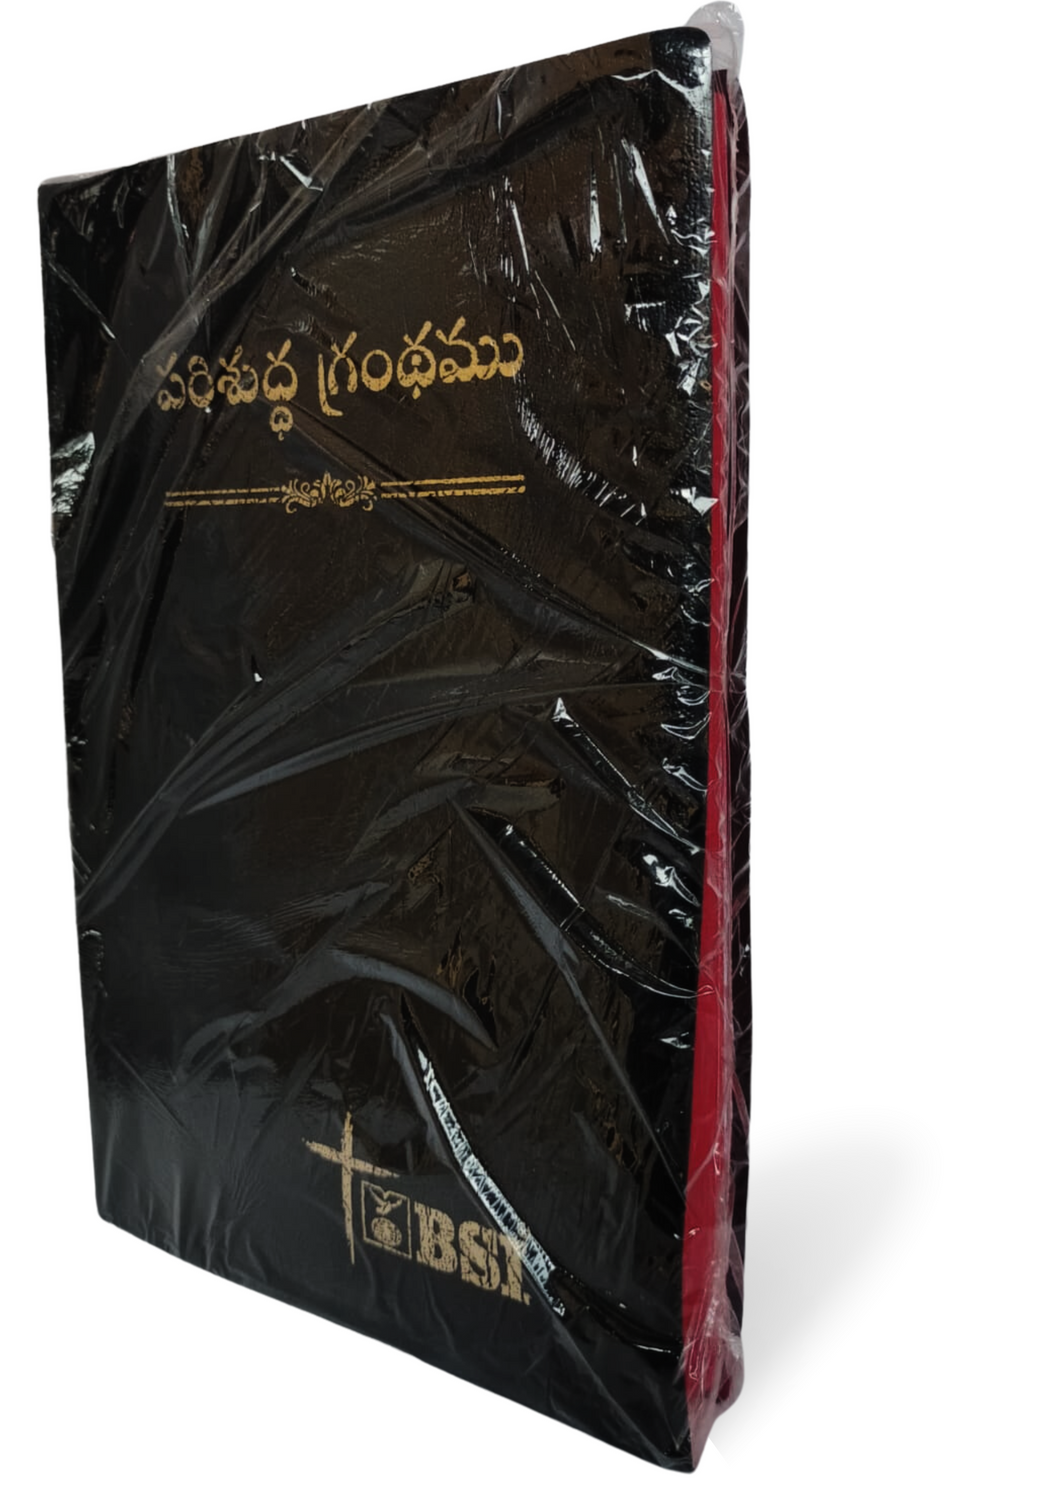 Telugu Holy Bible - BSI Version Containing Old and New Testament. Packing, Delivery Included.